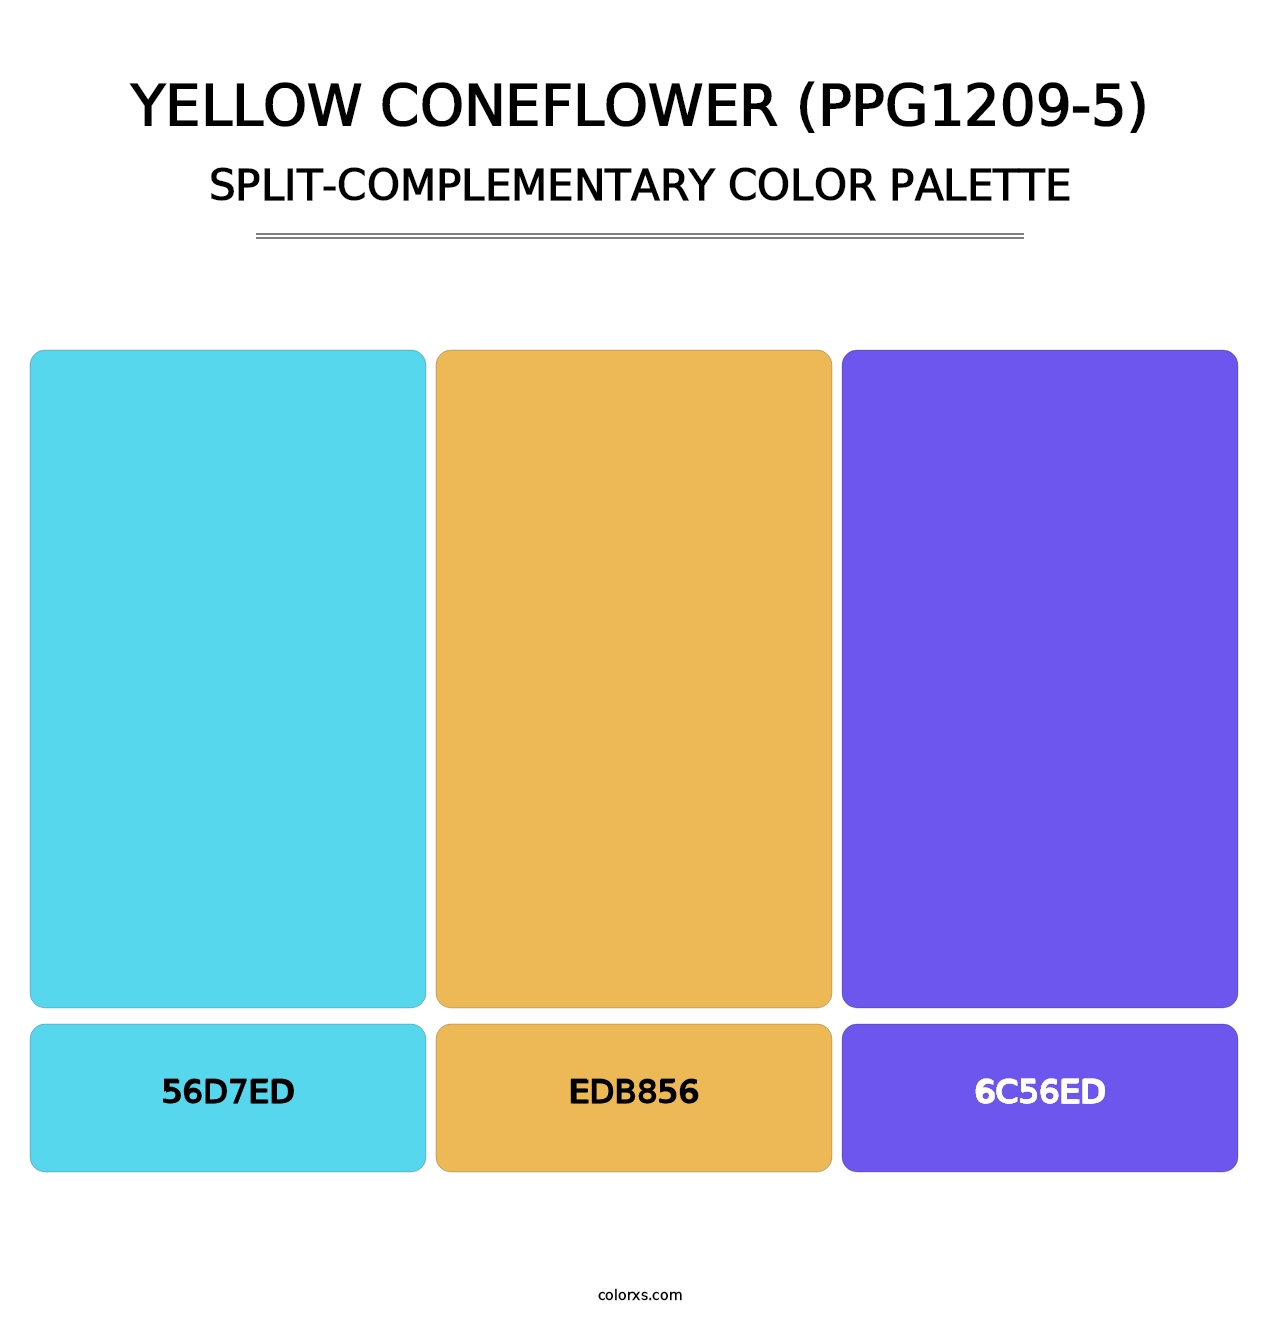 Yellow Coneflower (PPG1209-5) - Split-Complementary Color Palette